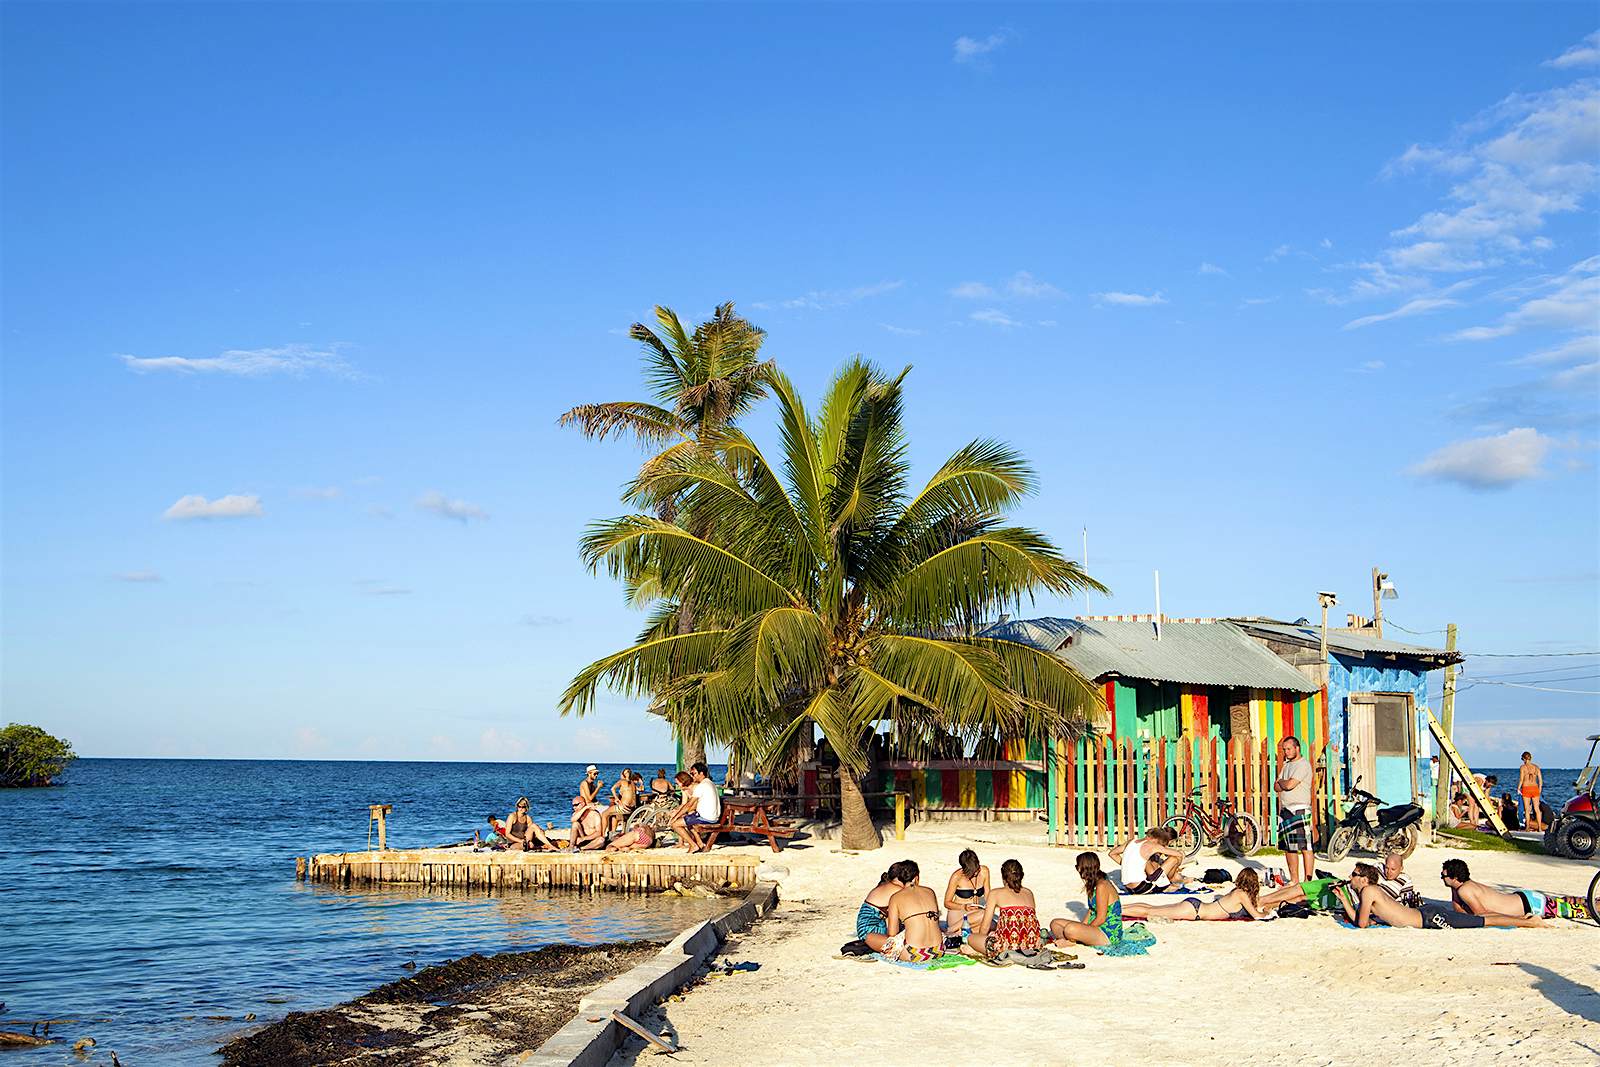 People sit on the small beach outside the Lazy Lizard bar © Alex Robinson / Getty Images